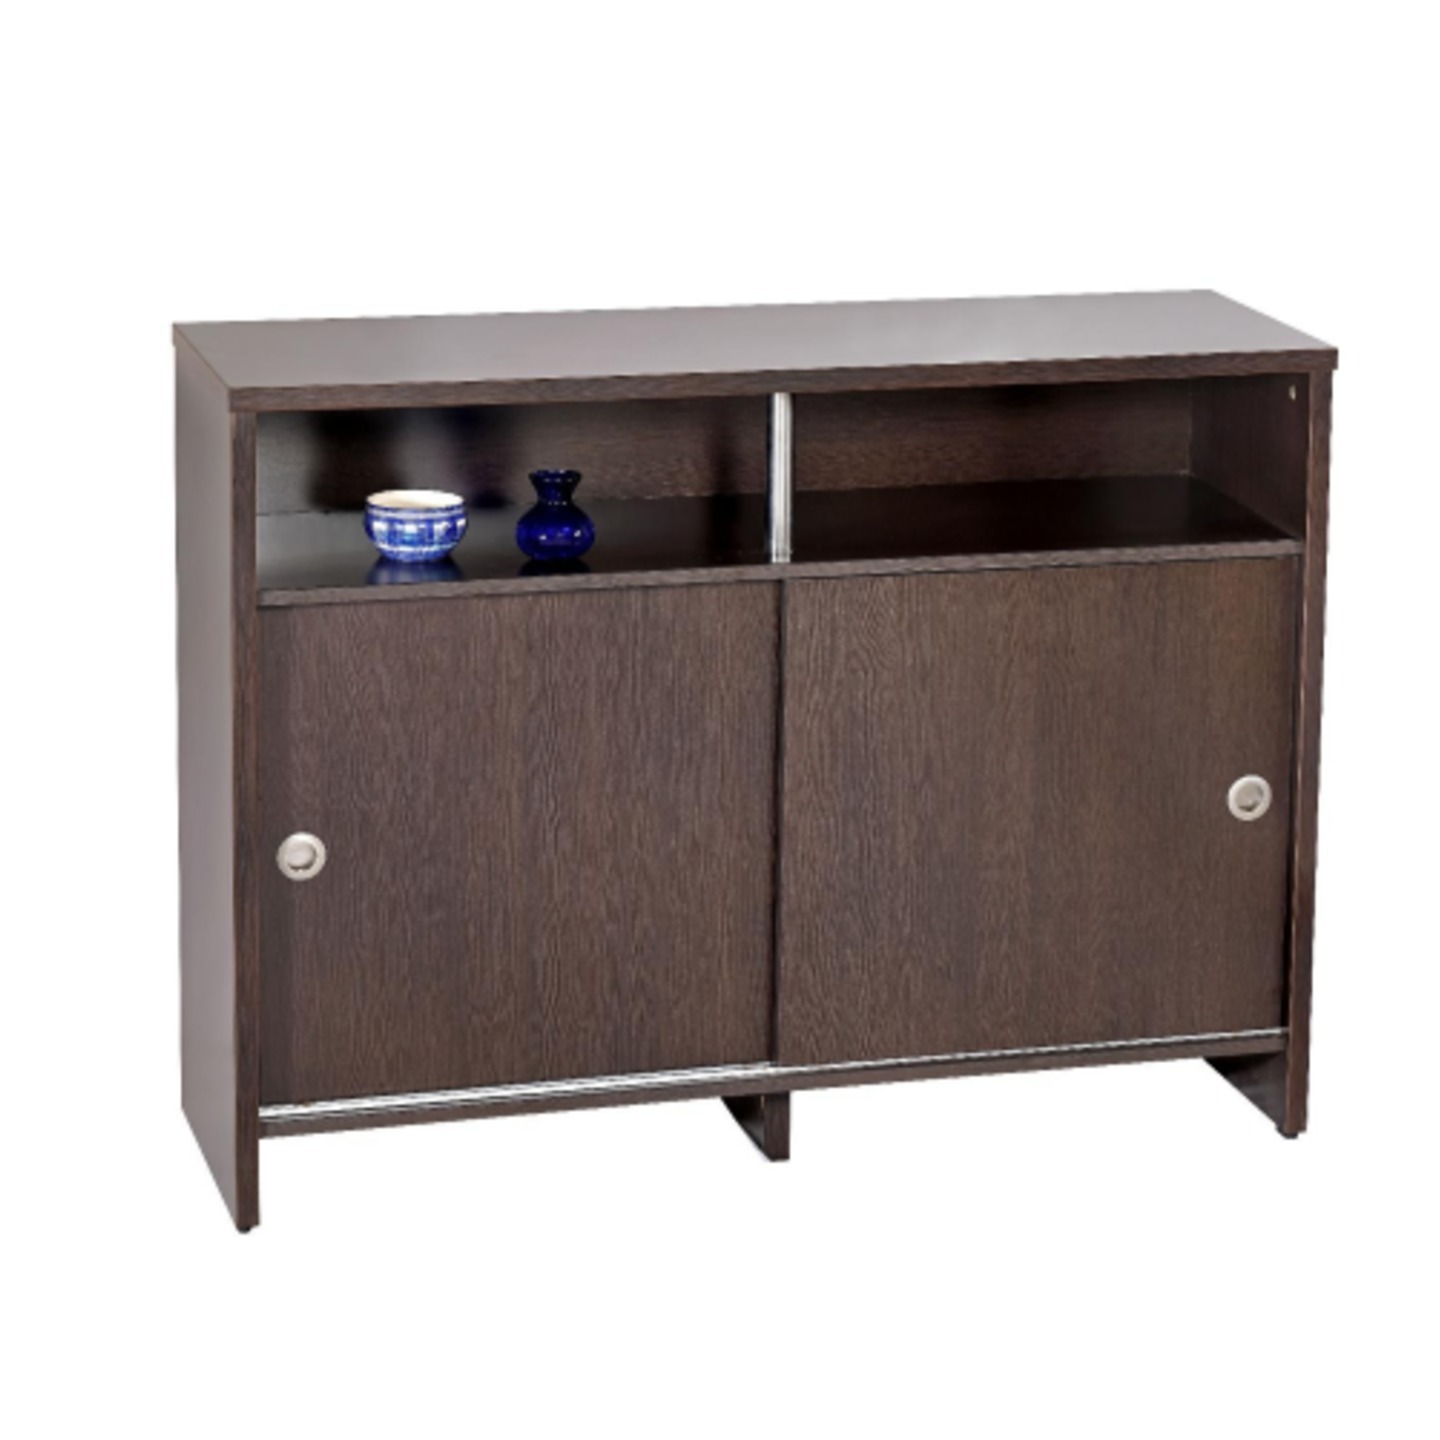 RD Multi Utility Cabinets RD-661 In Brown Colour